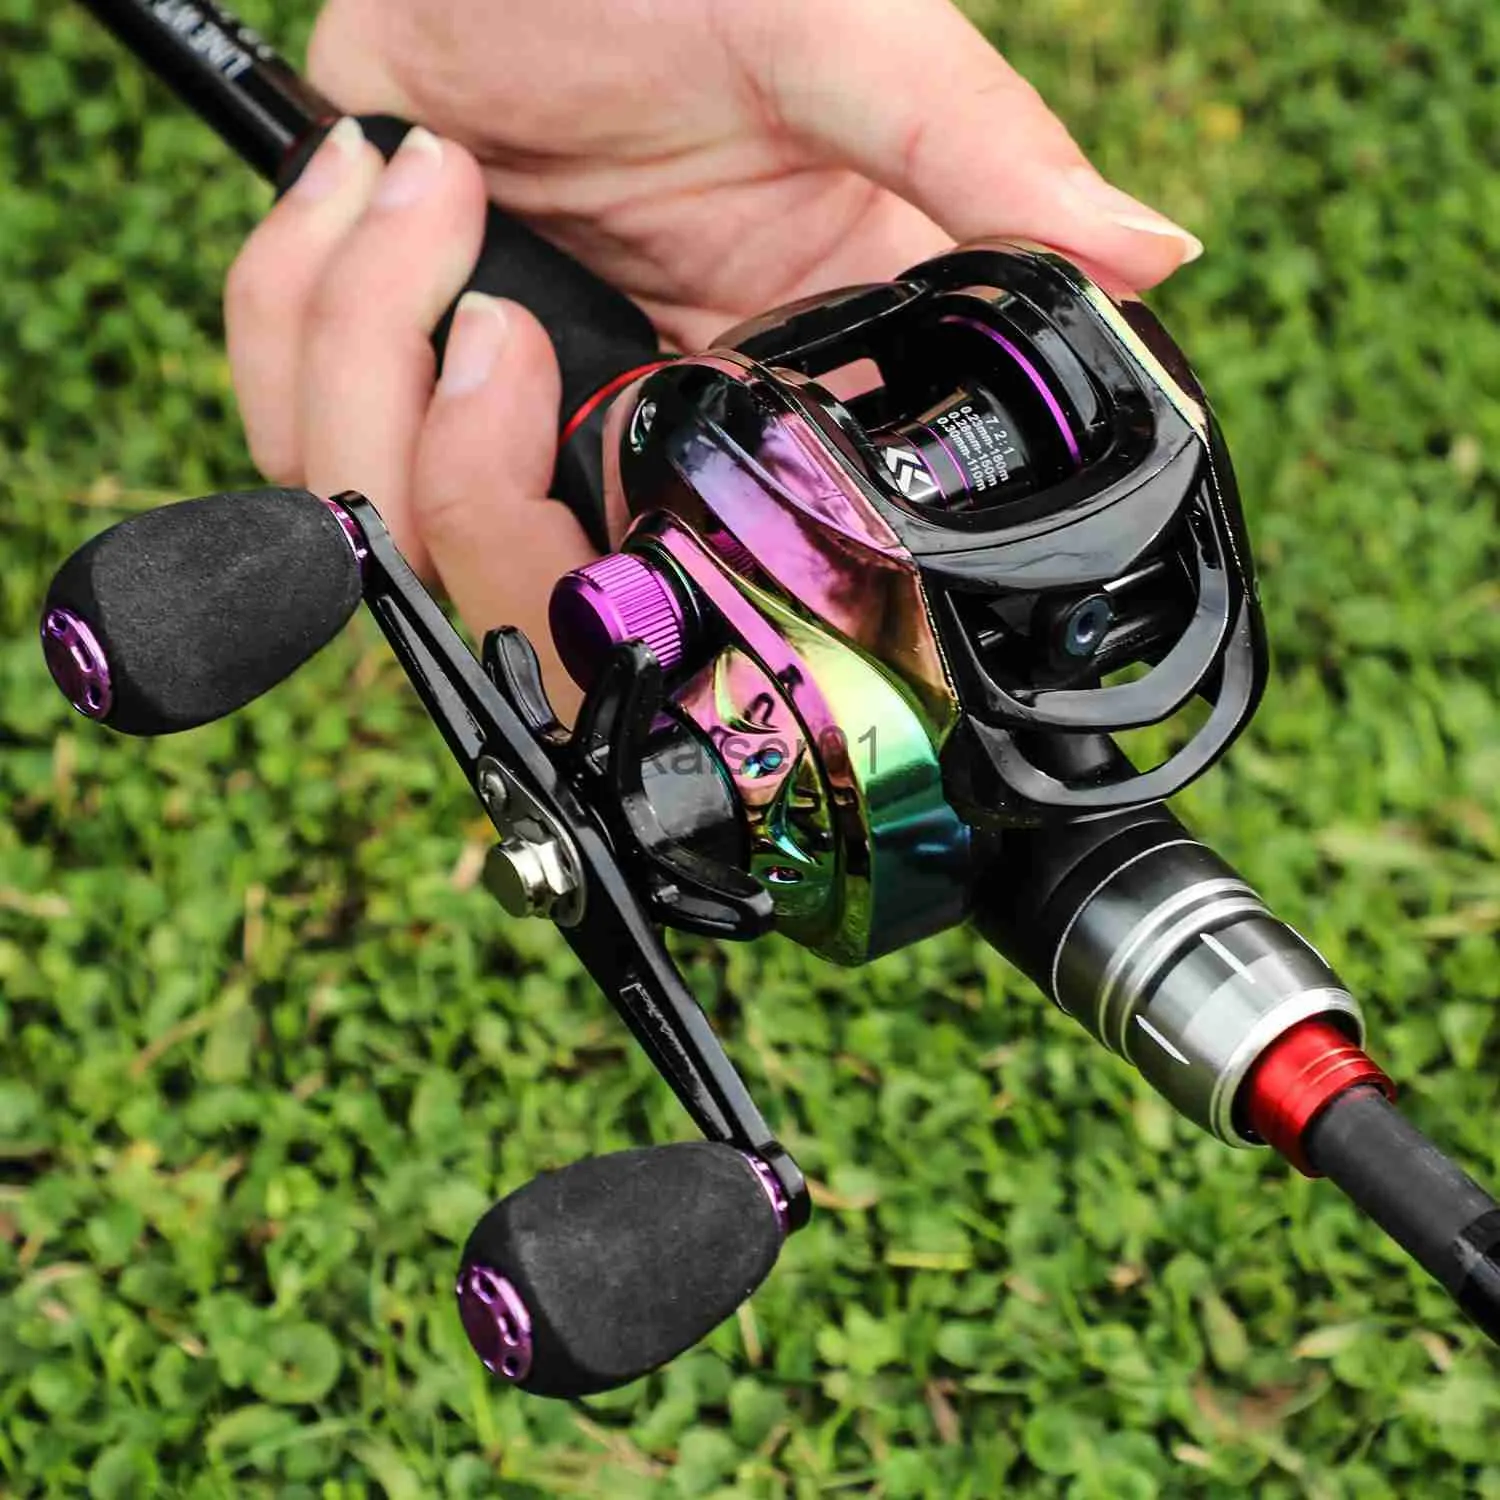 Sougayilang Fishing Combo 1.8m/2.1m Long Casting Spinning Reels And Reel  Set With Braided Fishing Line For Left And Right Hand Baitcasting X0901  From Kaiser01, $35.53